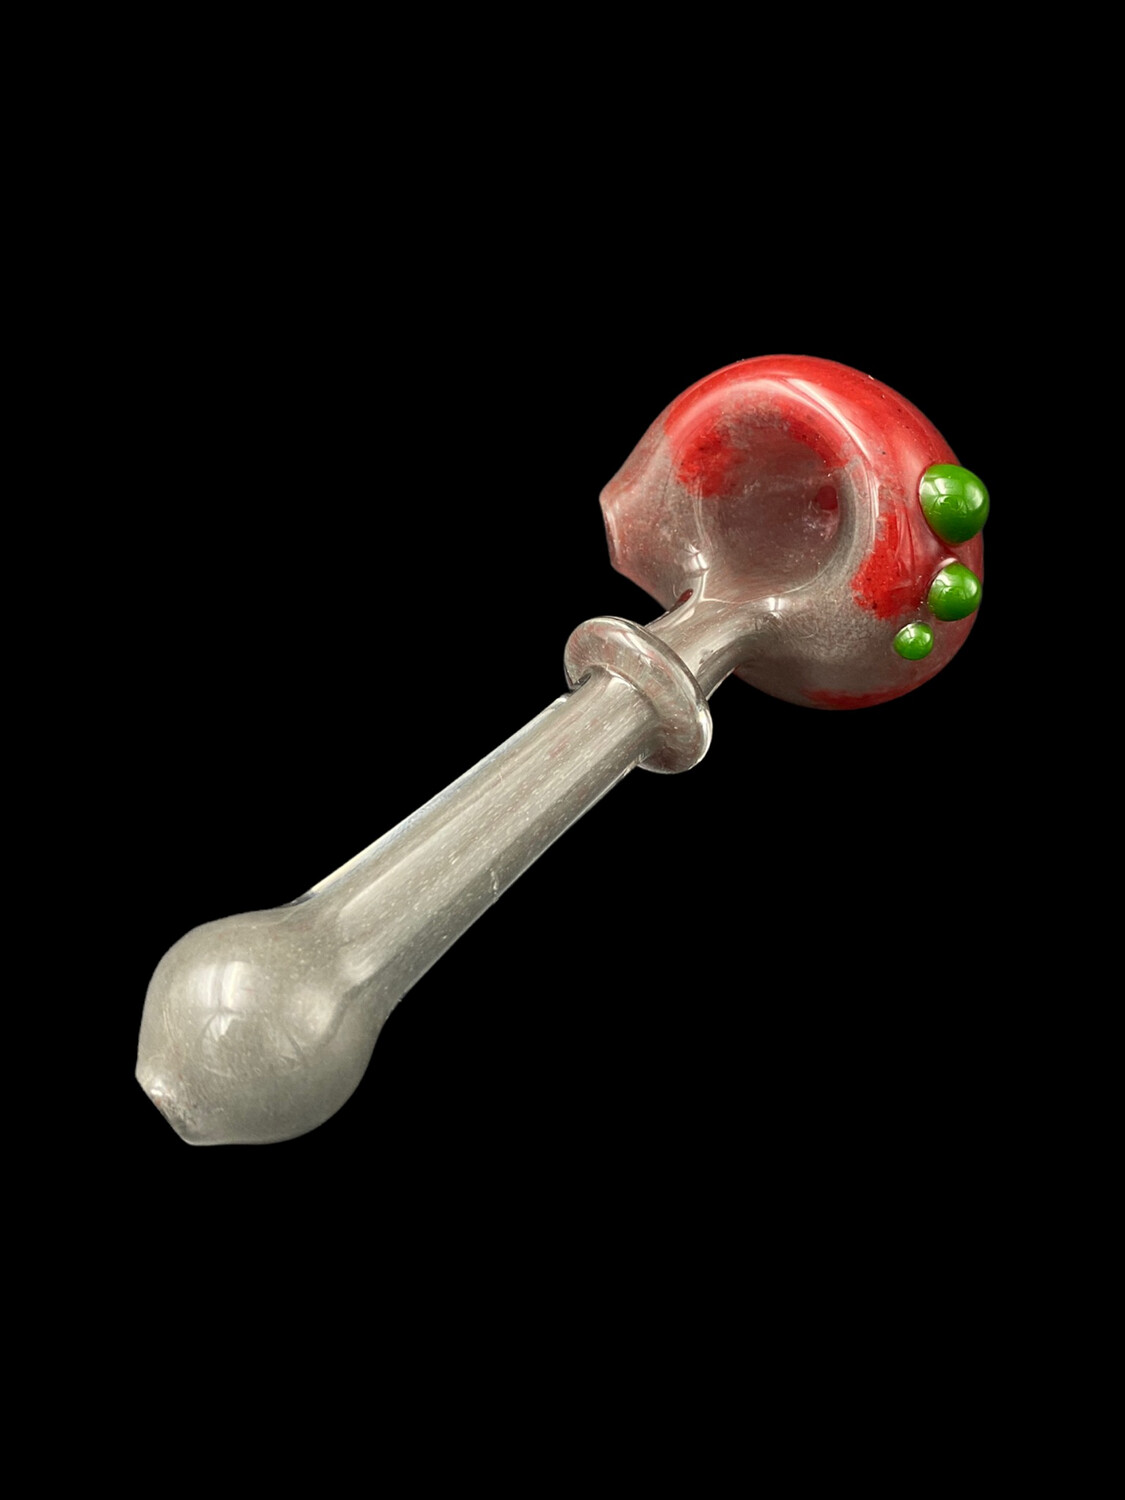 Goblin King (TX) Frit Spoon - Grey to Red